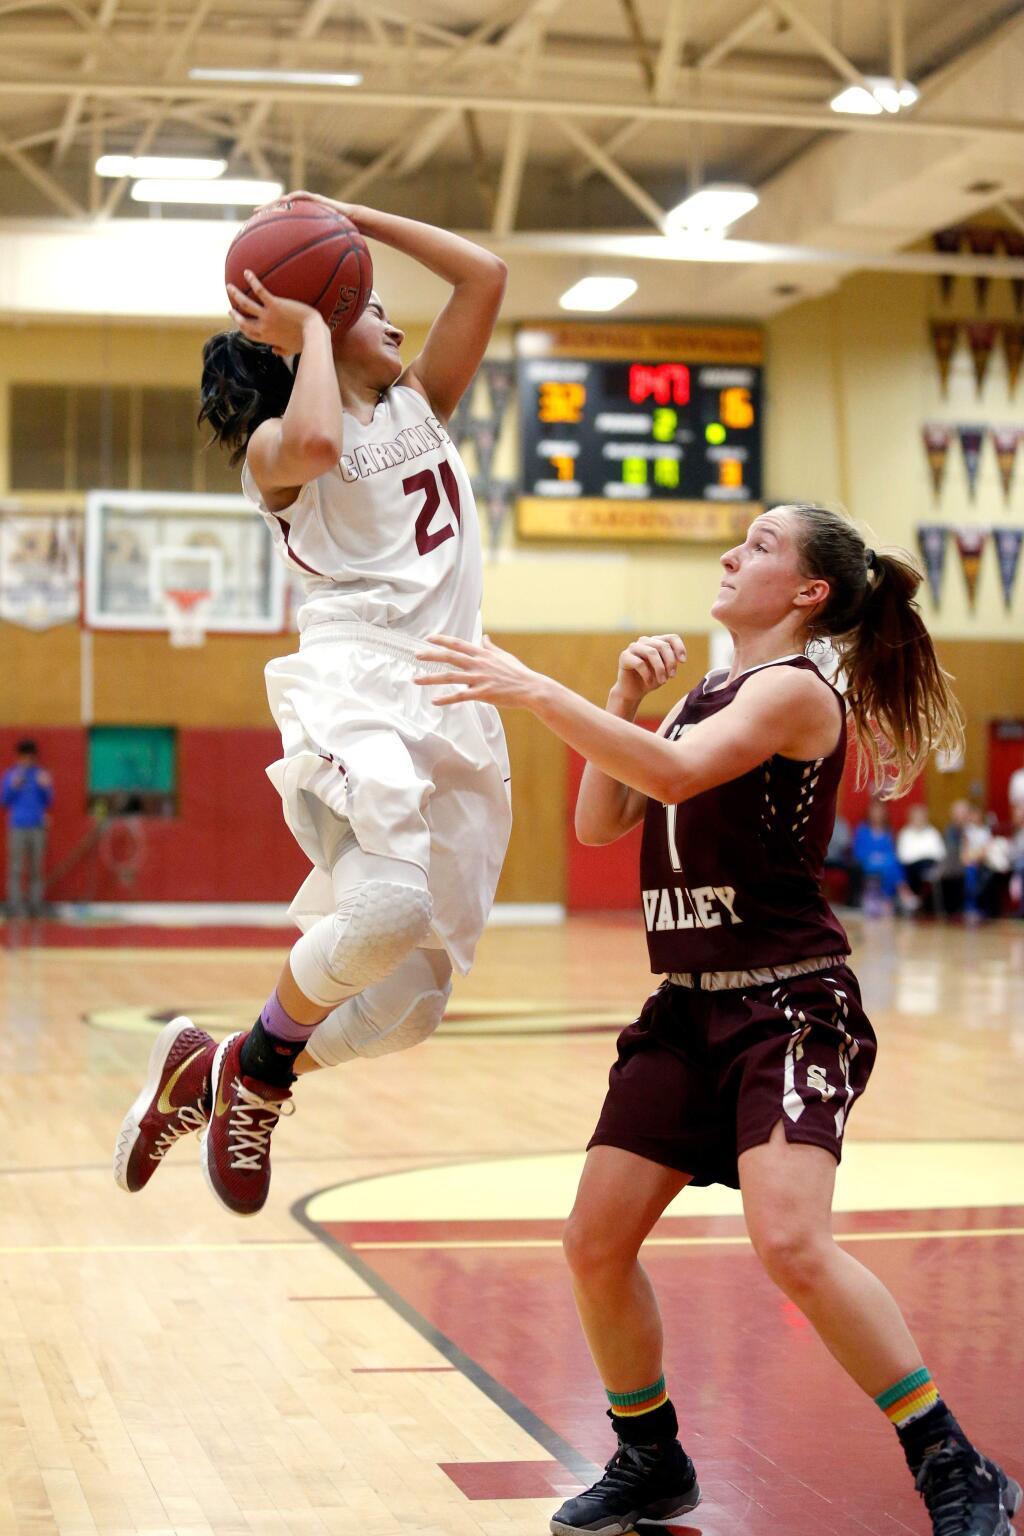 Cardinal Newman's Avery Cargill (21) reacts after being fouled on a drive to the basket by Scotts Valley's Nikiya Bechtle (1) during the first half of the CIF NorCal girls basketball playoff game on Saturday, March 12, 2016. (Alvin Jornada / The Press Democrat)